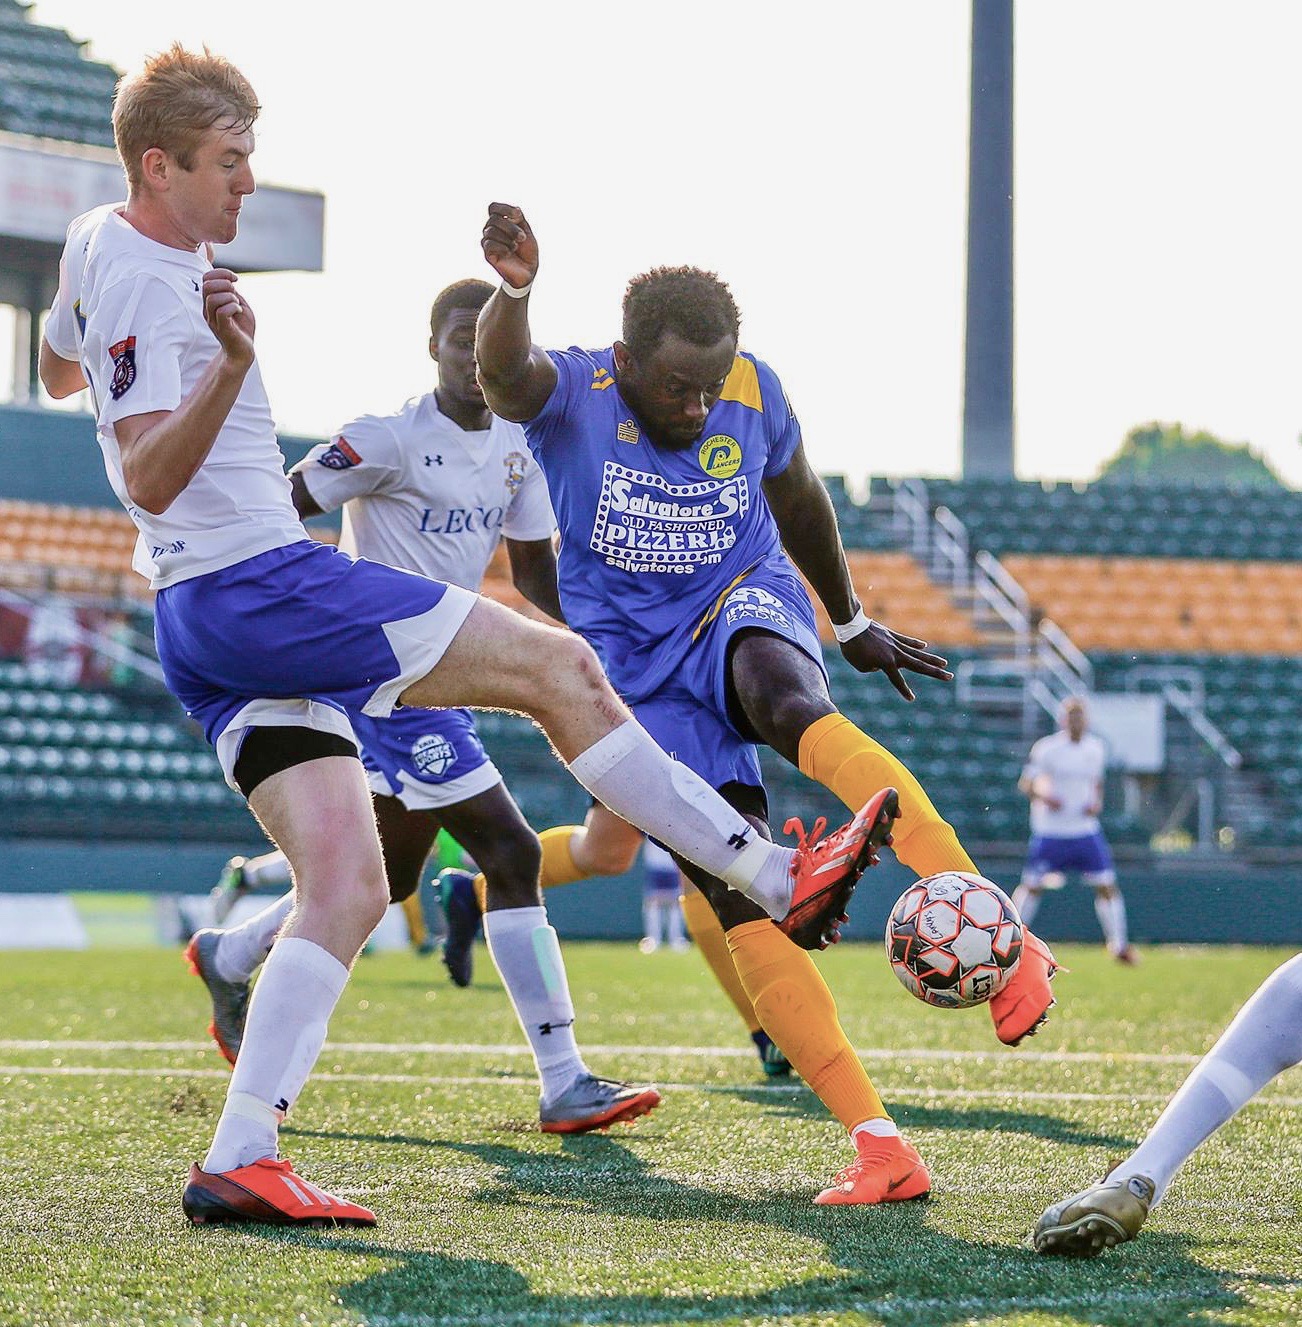 Upstate nurse Isaac Kissi, playing for the Rochester Lancers in the blue jersey, has played soccer both professionally and for fun (photos by Rob Daniels)